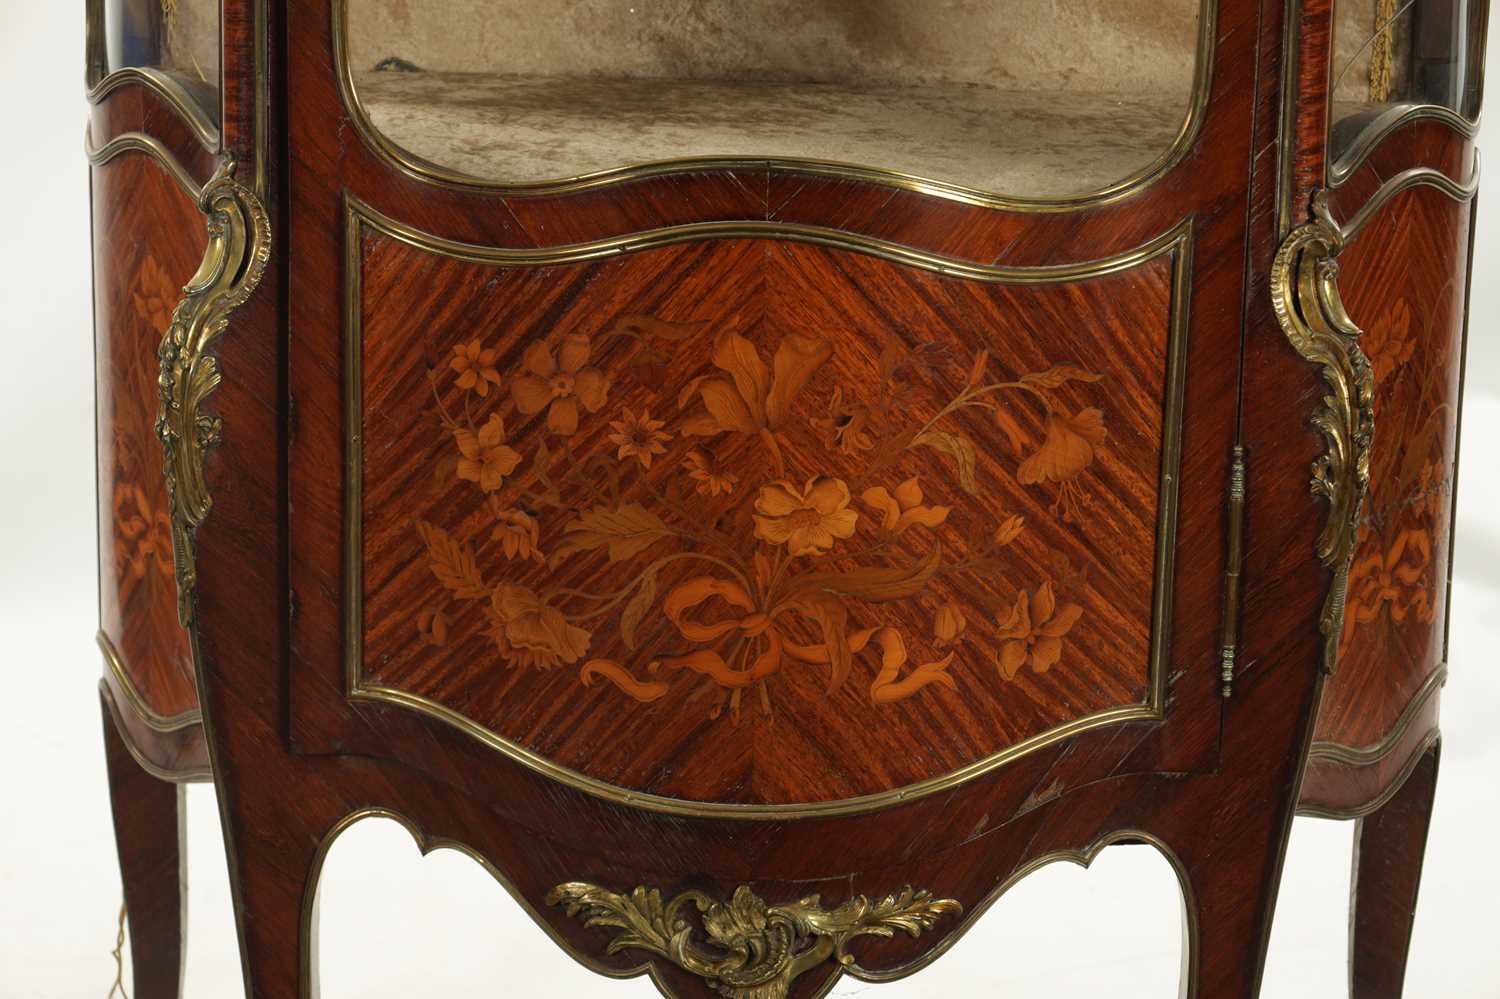 A 19TH CENTURY MARQUETRY INLAID ROSEWOOD RENE MARTIN DISPLAY CABINET / VITRENE - Image 2 of 9